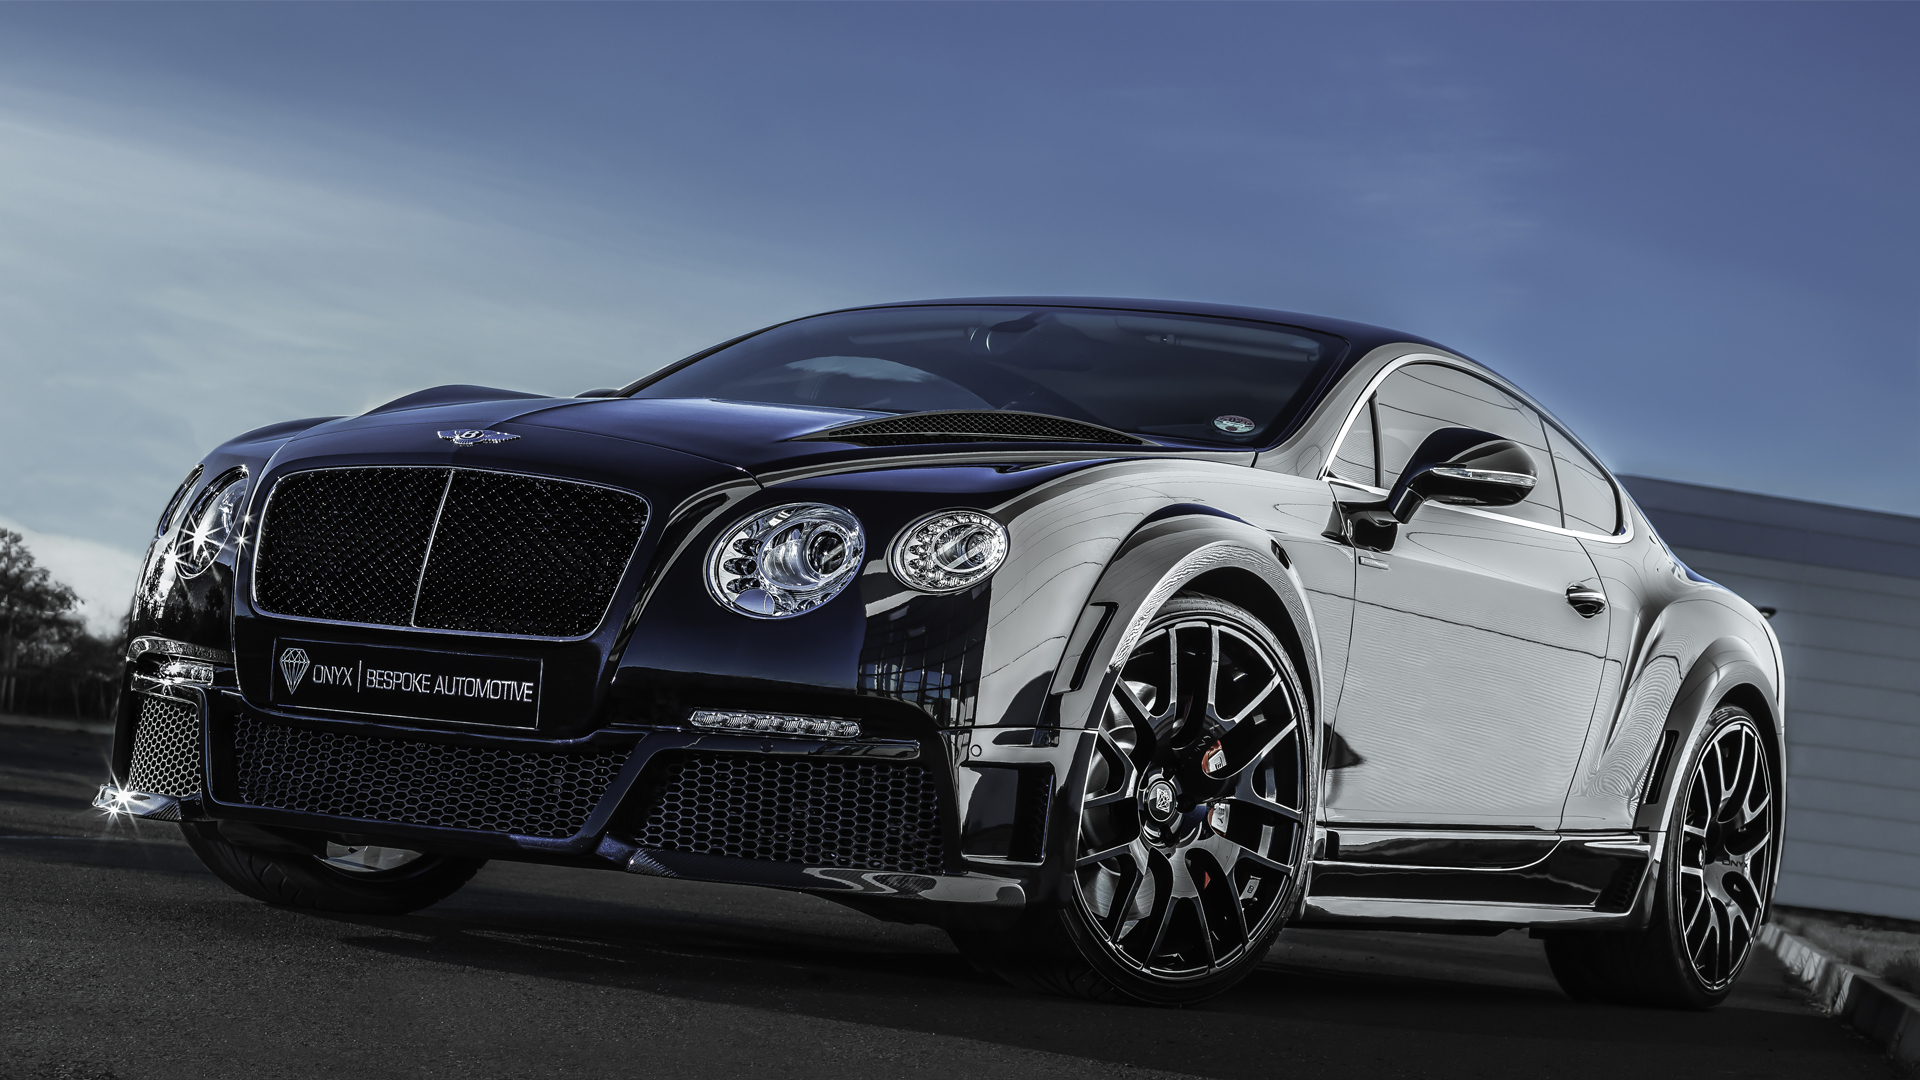 Onyx GTXI body kit for Bentley Continental GT new model